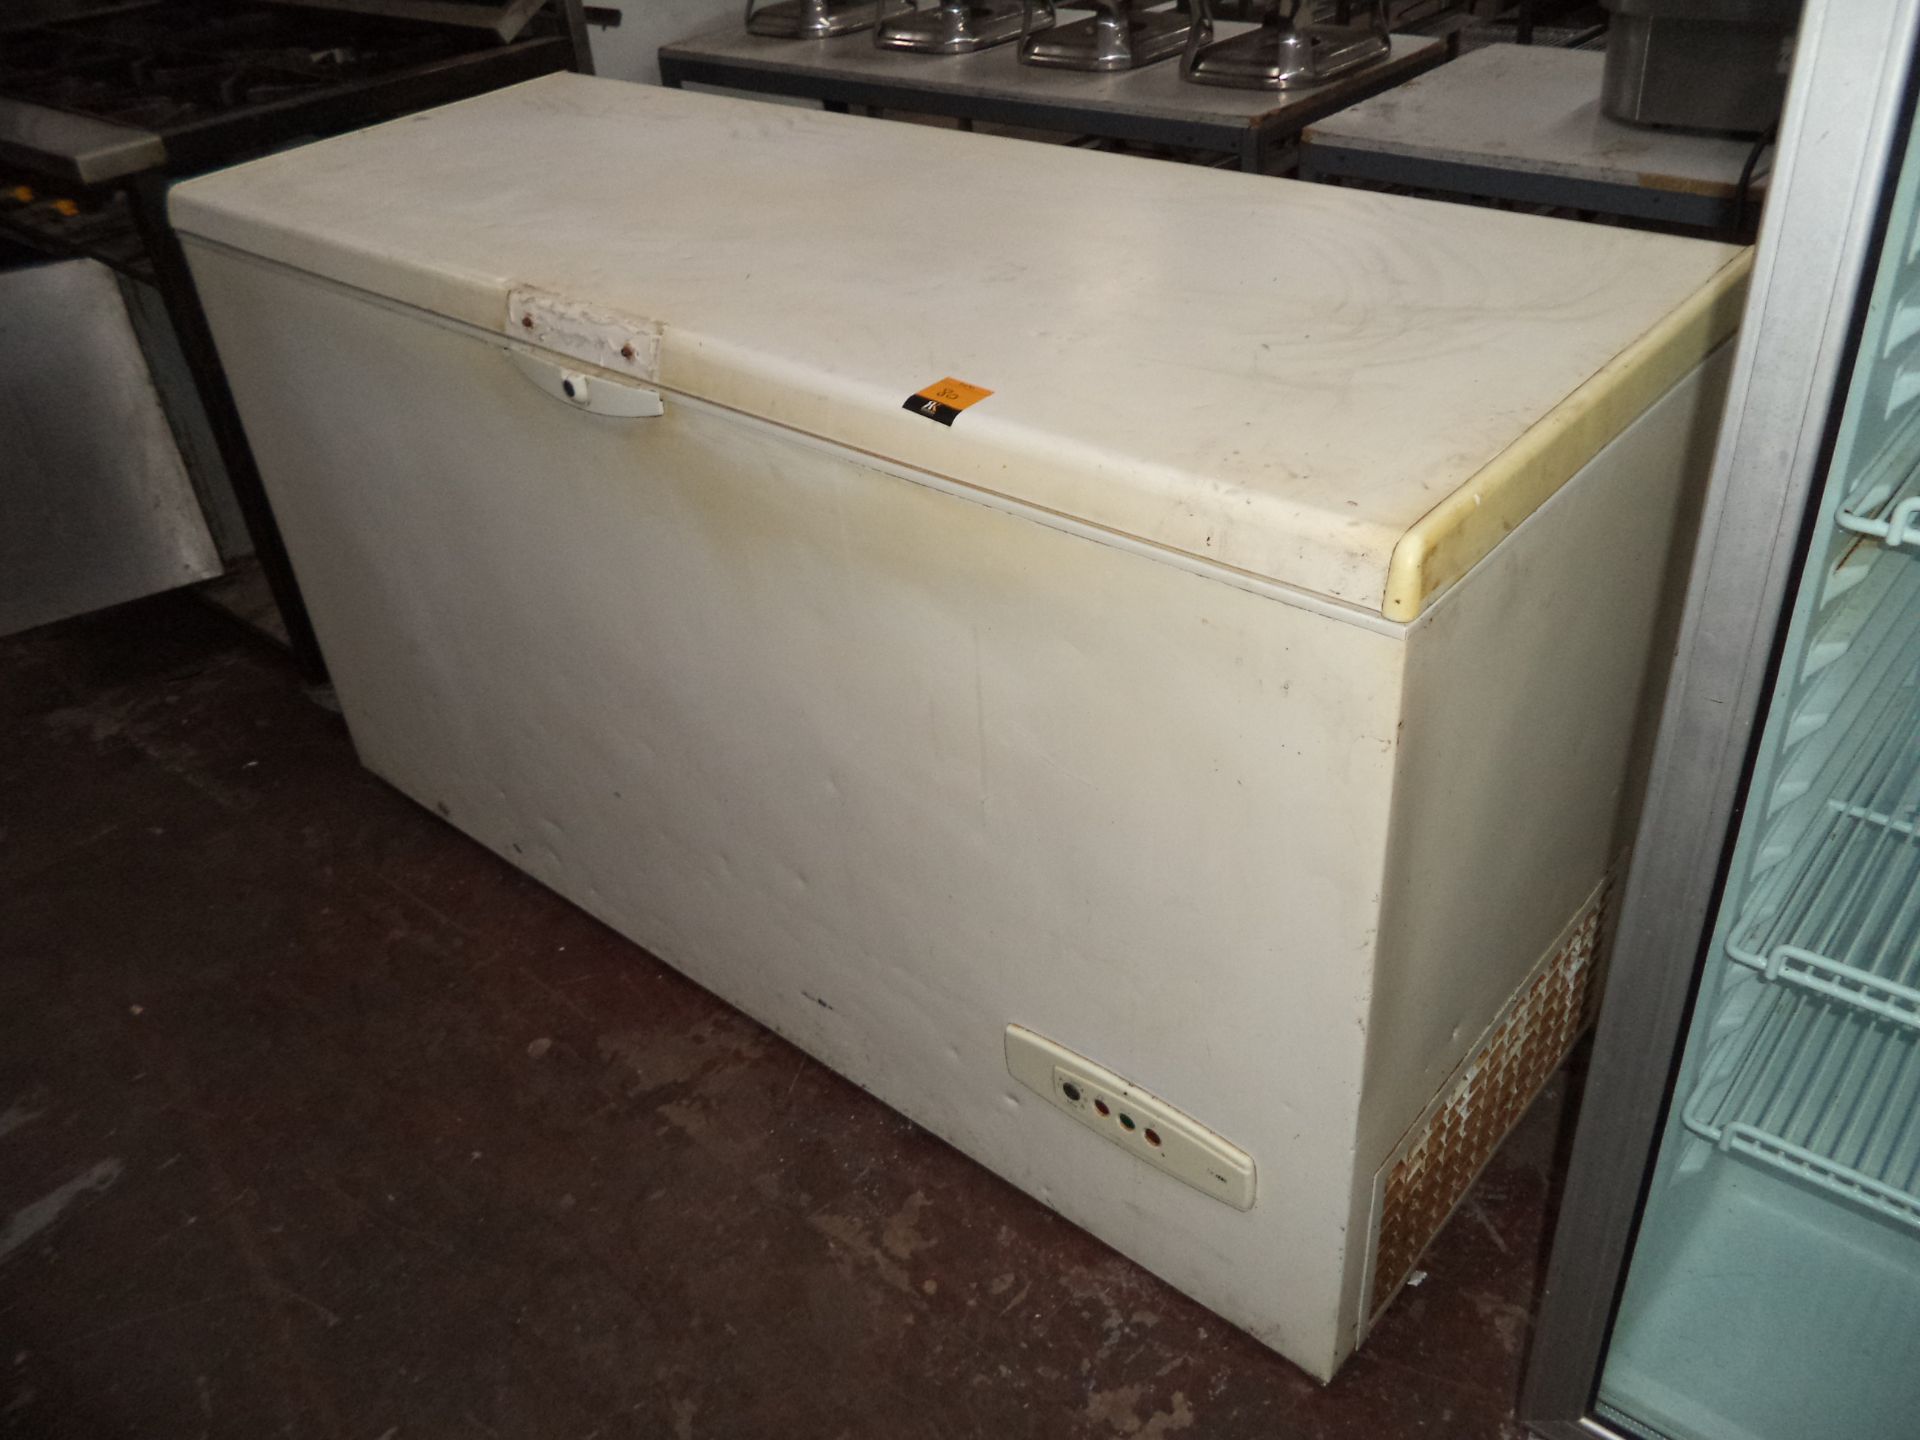 Chest freezer circa 1620mm wide IMPORTANT: Please remember goods successfully bid upon must be